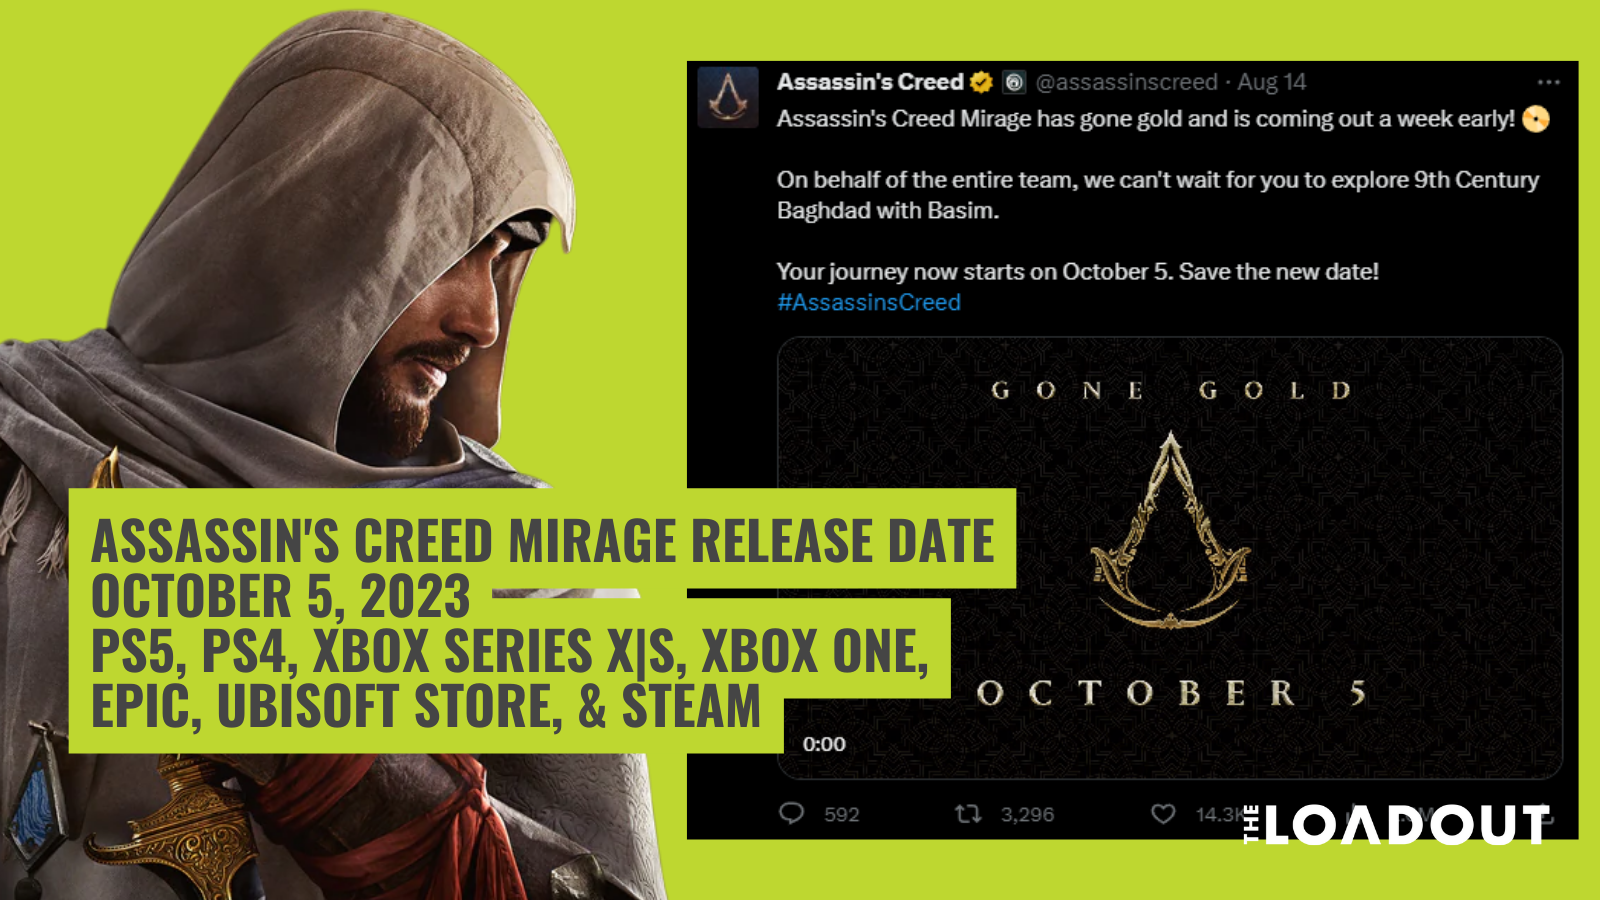 Assassin's Creed Mirage release times for every region